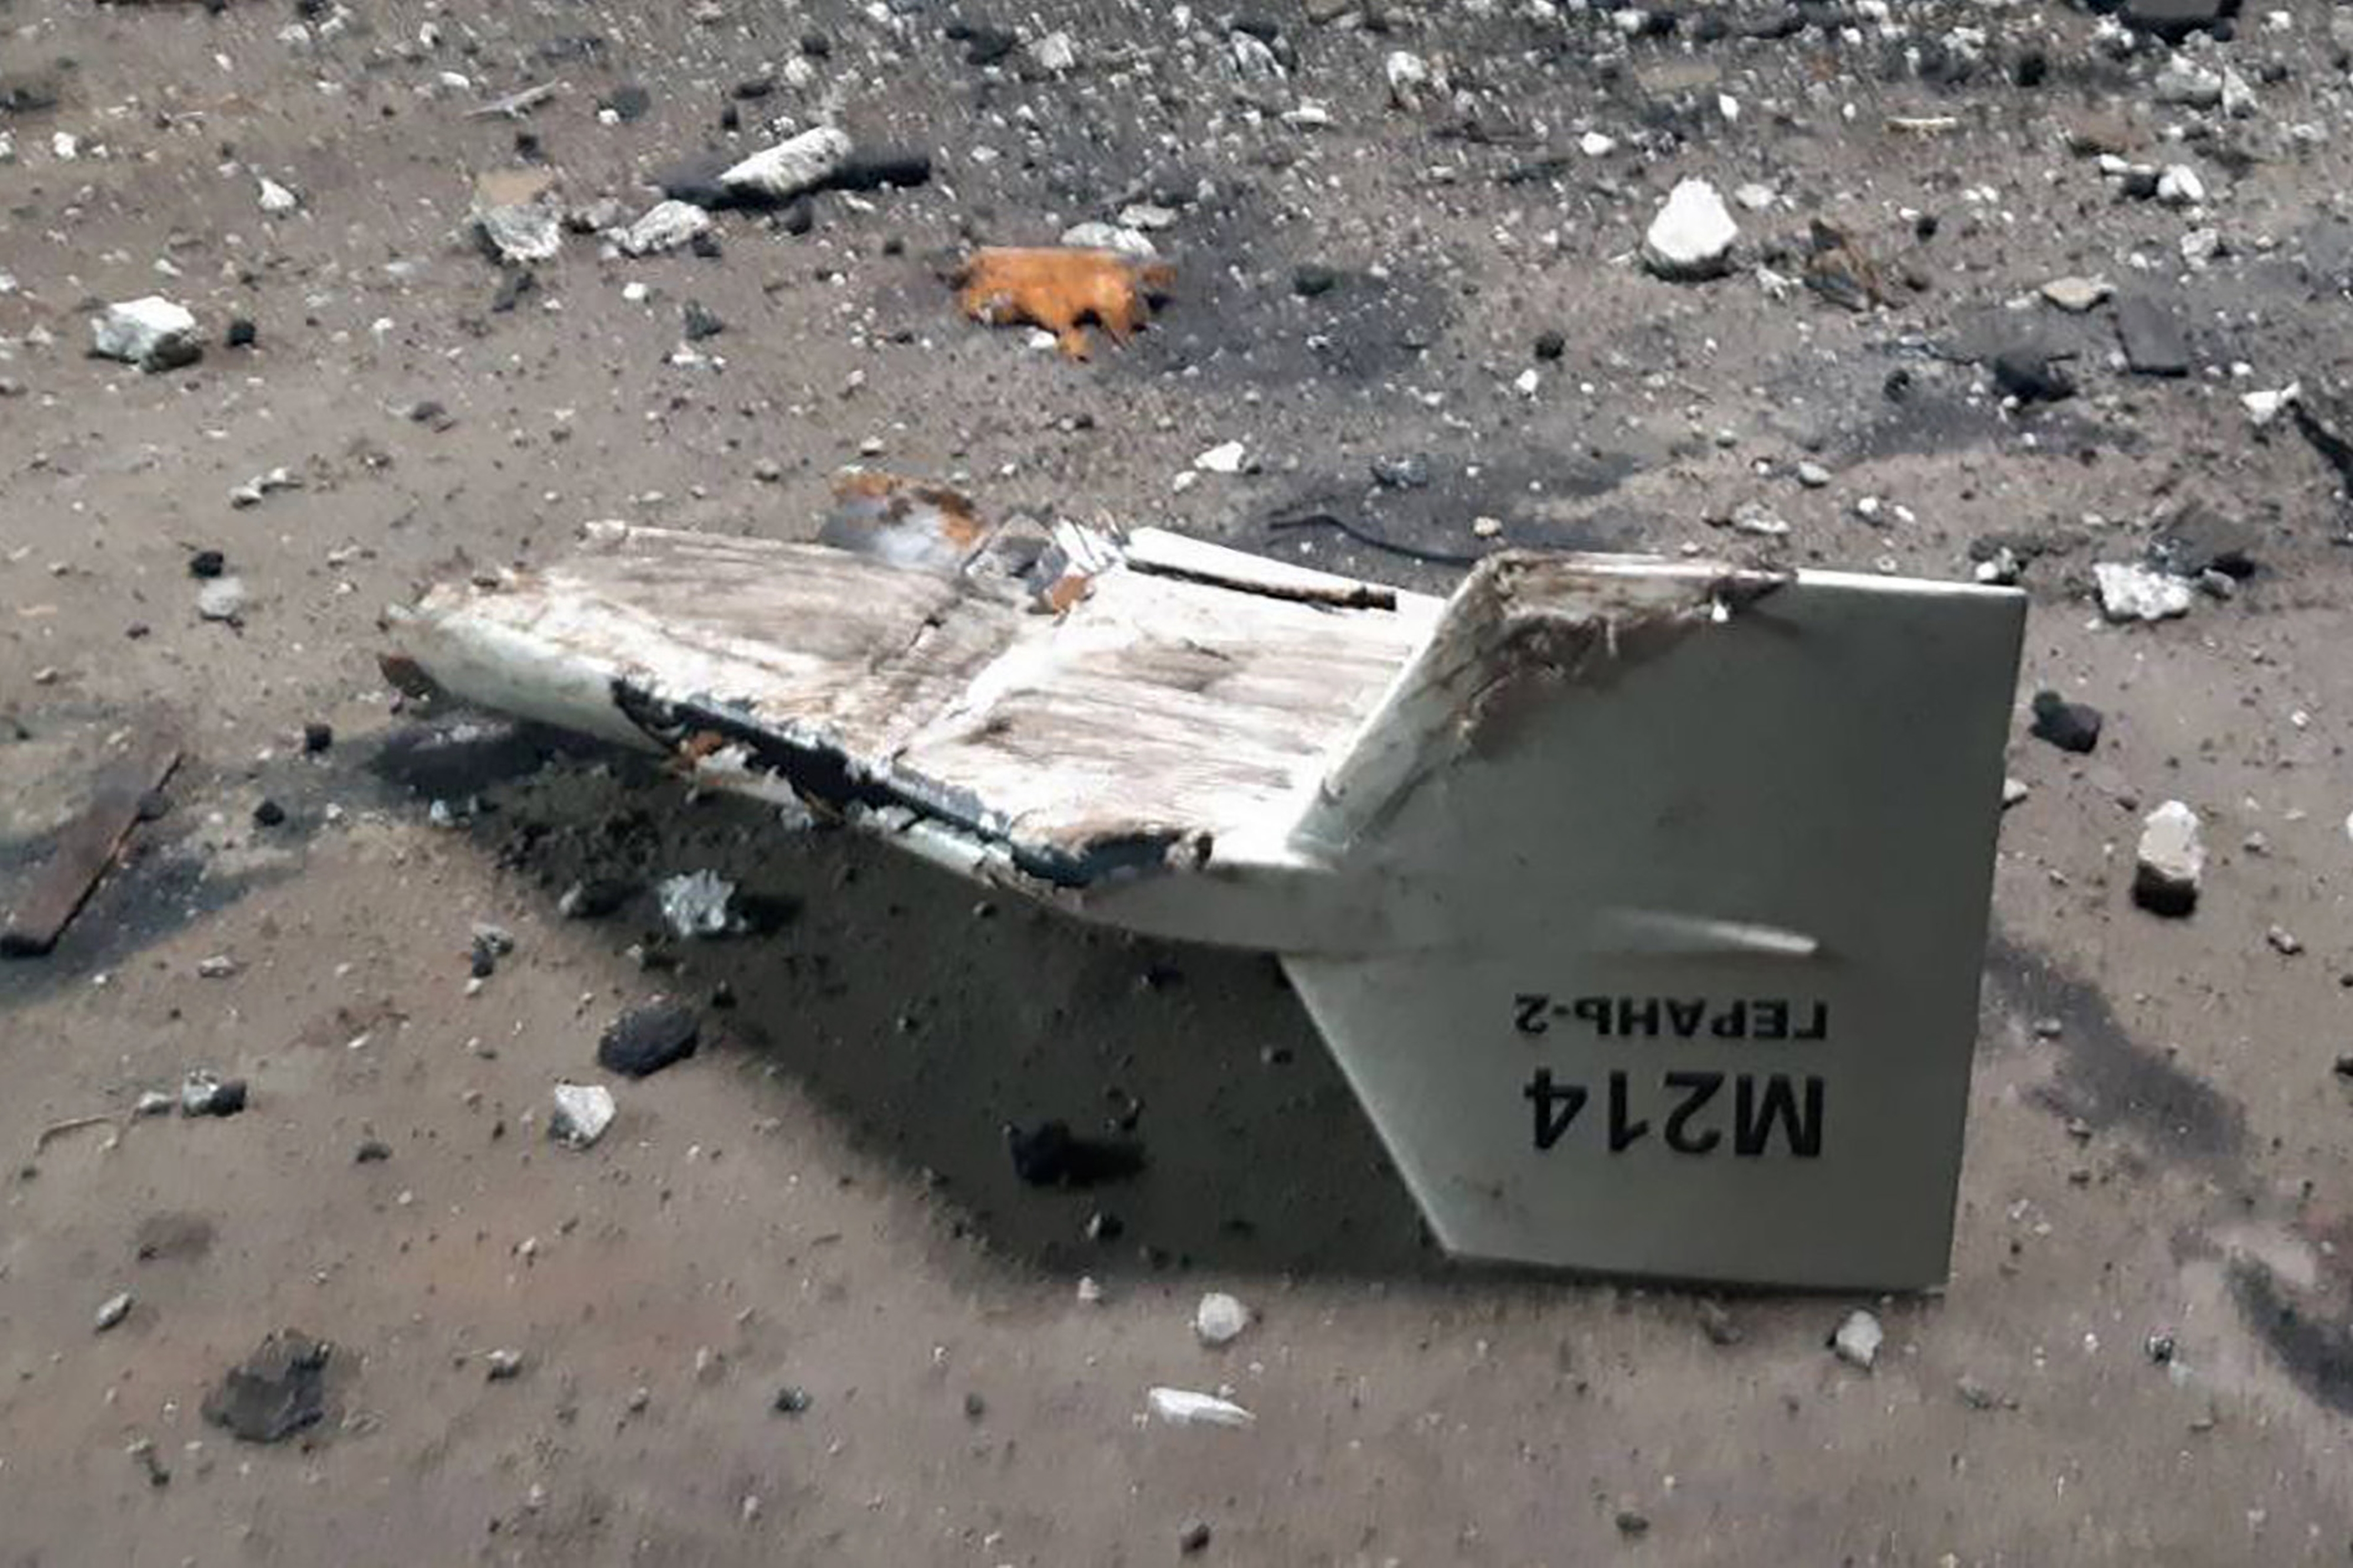 Remains of an Iranian-made drone launched by Russia and successfully shot down by Ukraine (AP)